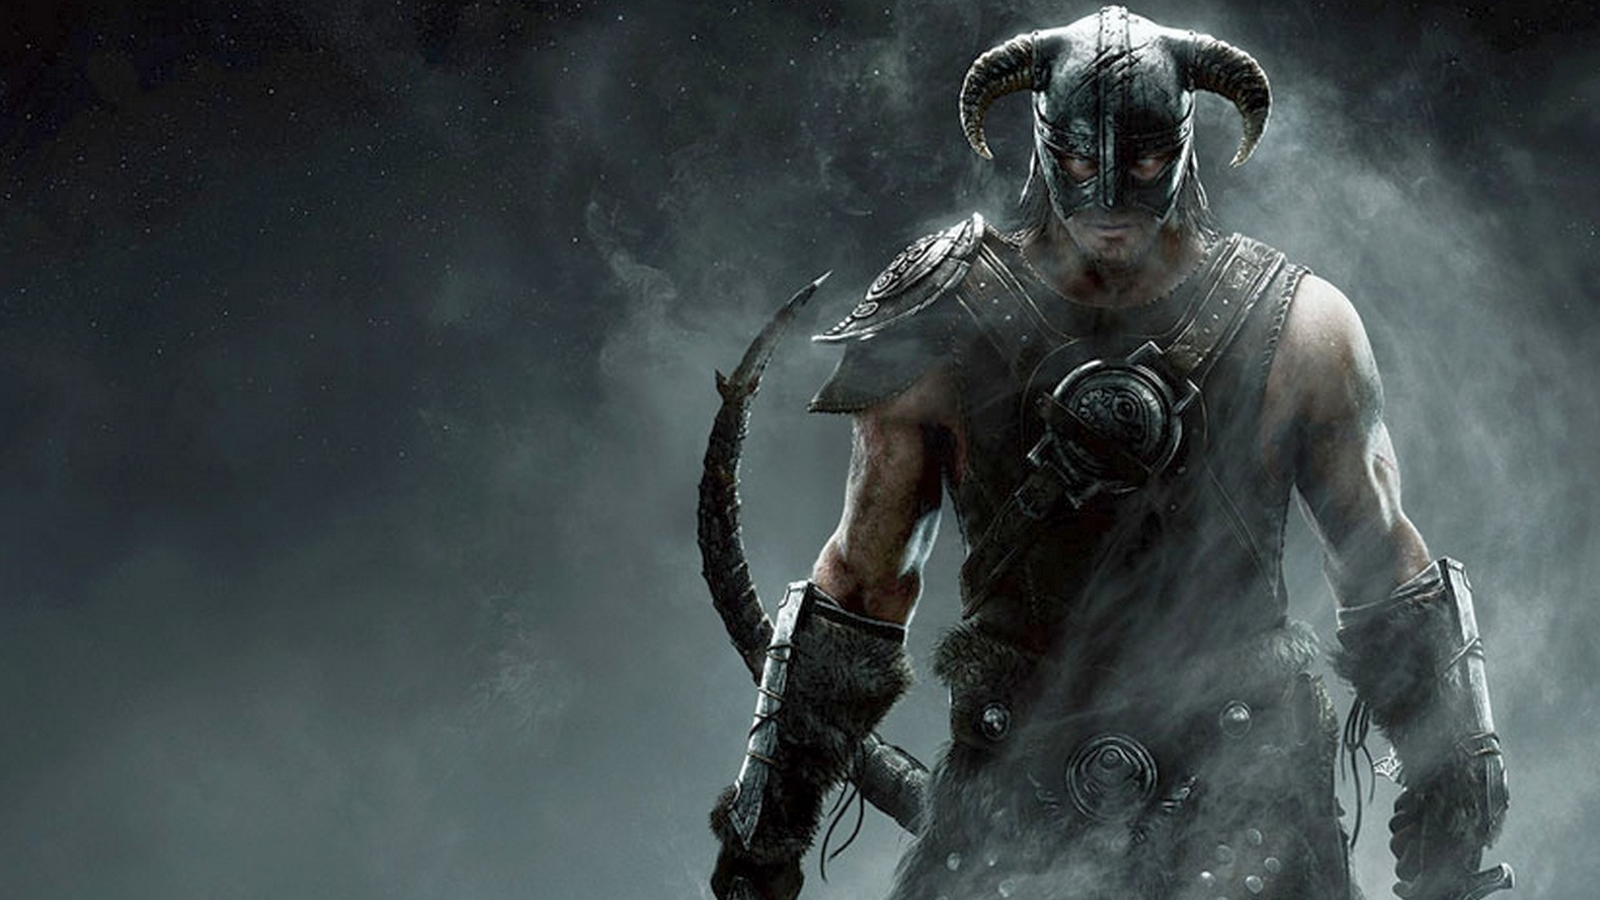 The Elder Scrolls VI is still “five plus years away”, will it come to